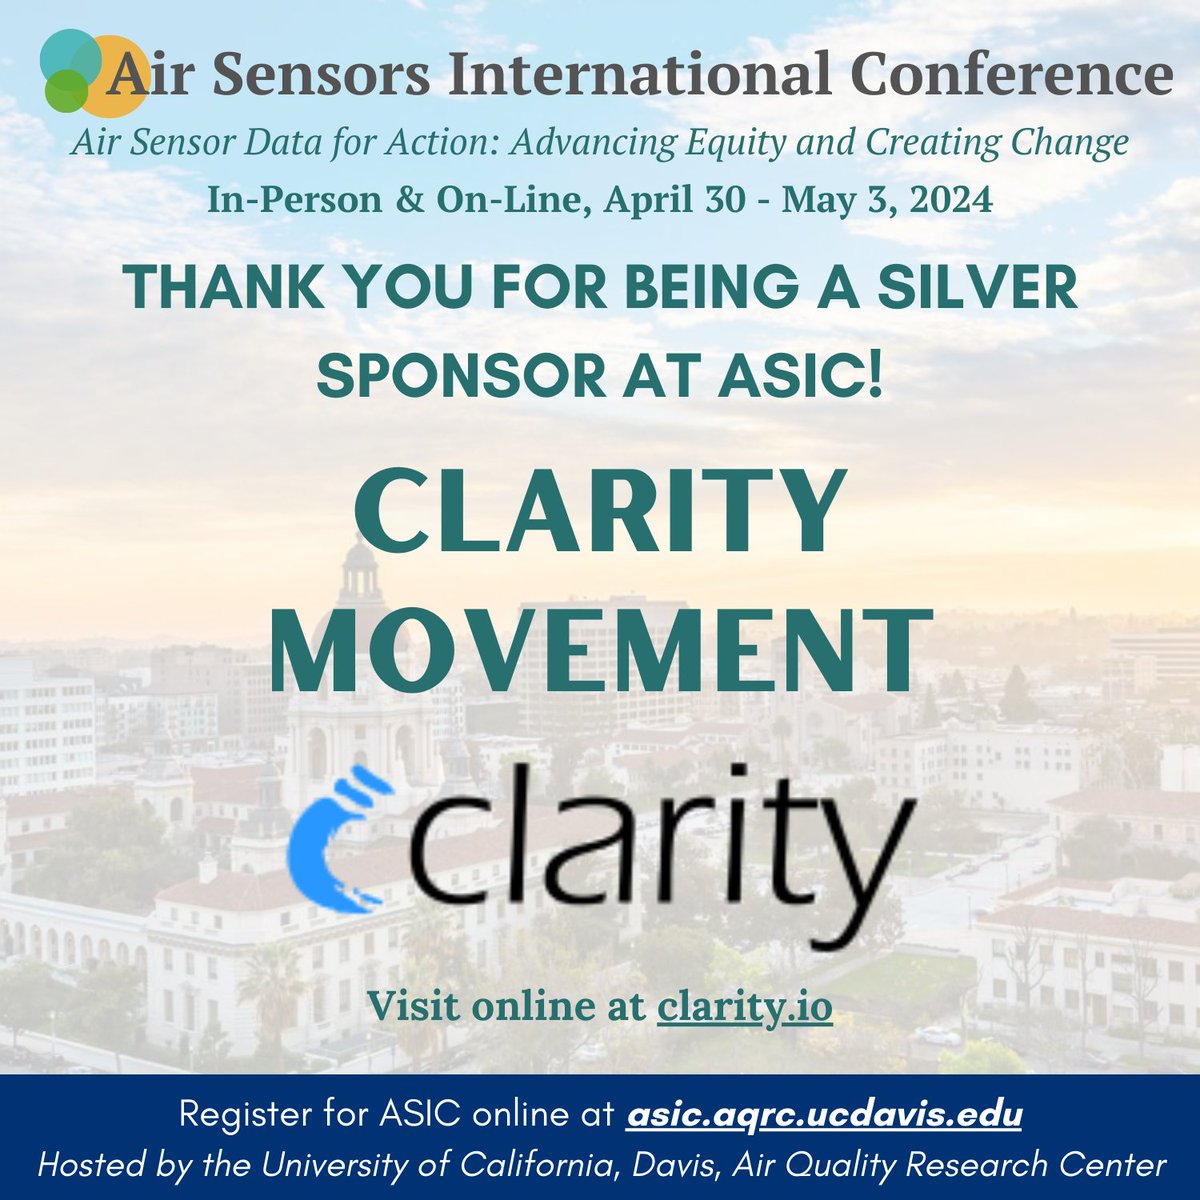 Thank you to Clarity for being a silver sponsor at ASIC California 2024! Learn more about them at  clarity.io.

@JoinClarity #ASIC2024 #airquality #airsensors #lowcostsensors #airpollution #communityscience